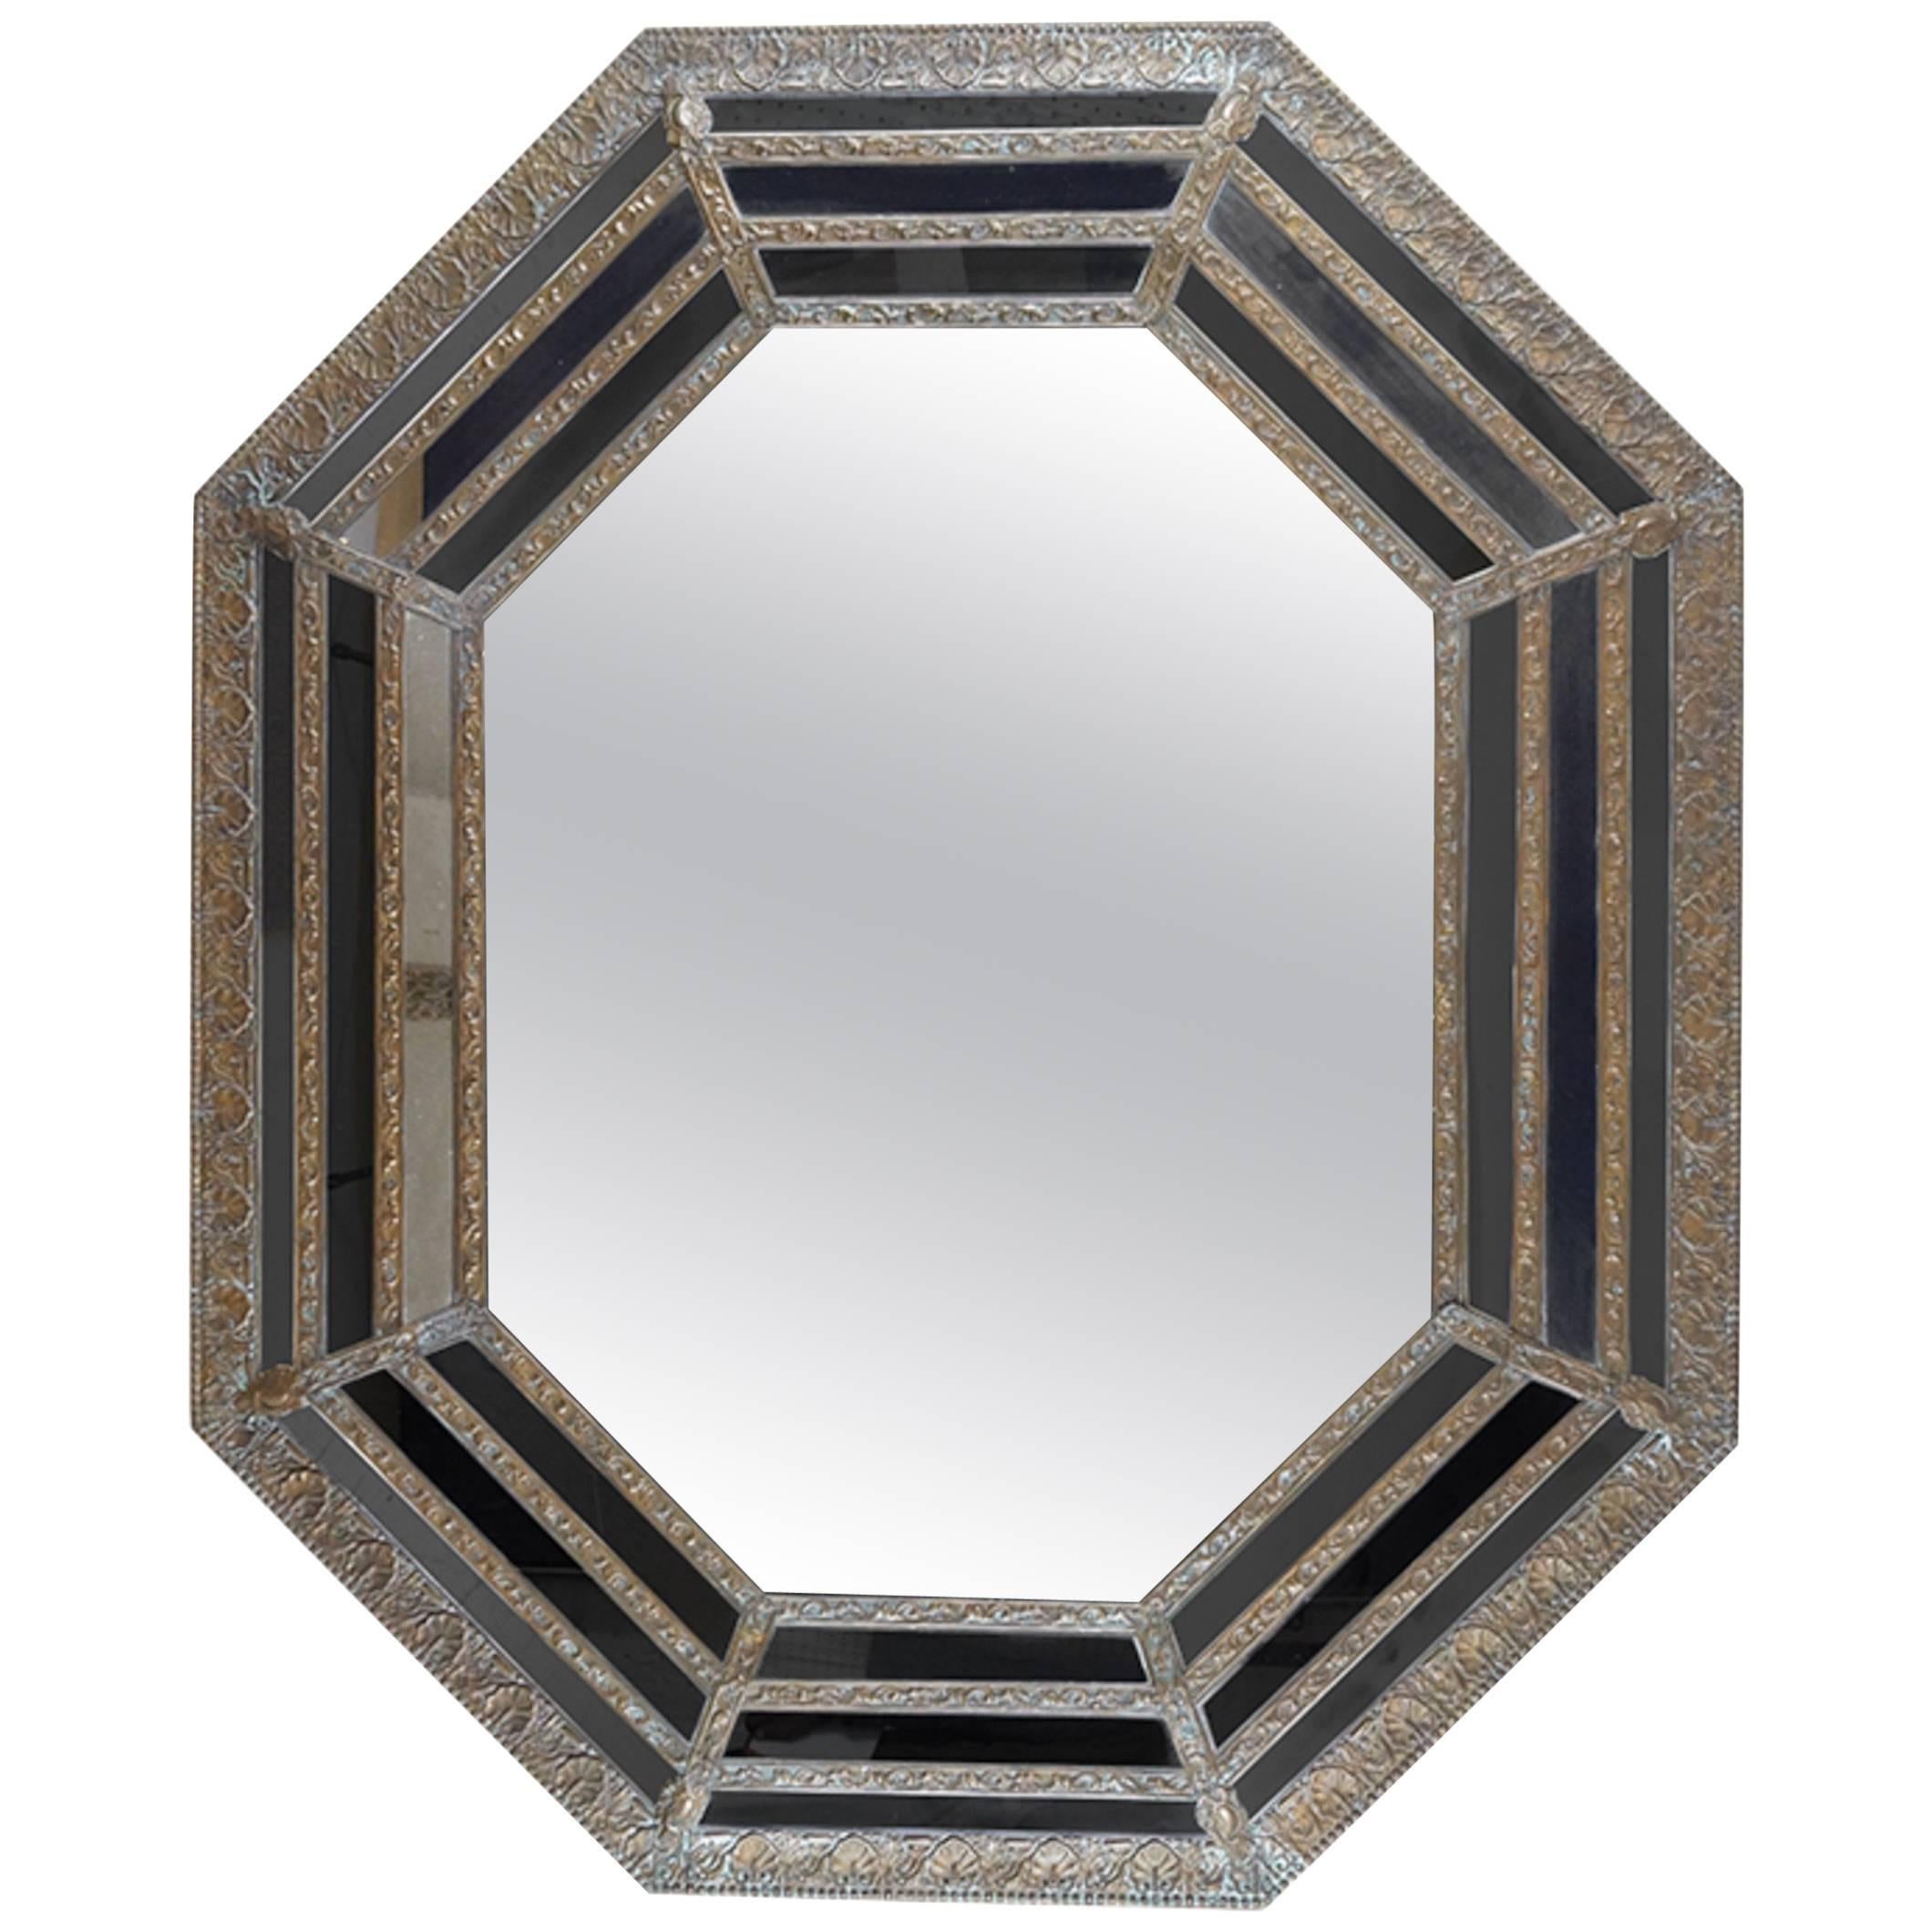 19th Century Octagonal Mirror with Repousse Metal Frame, Original Mirror Plate